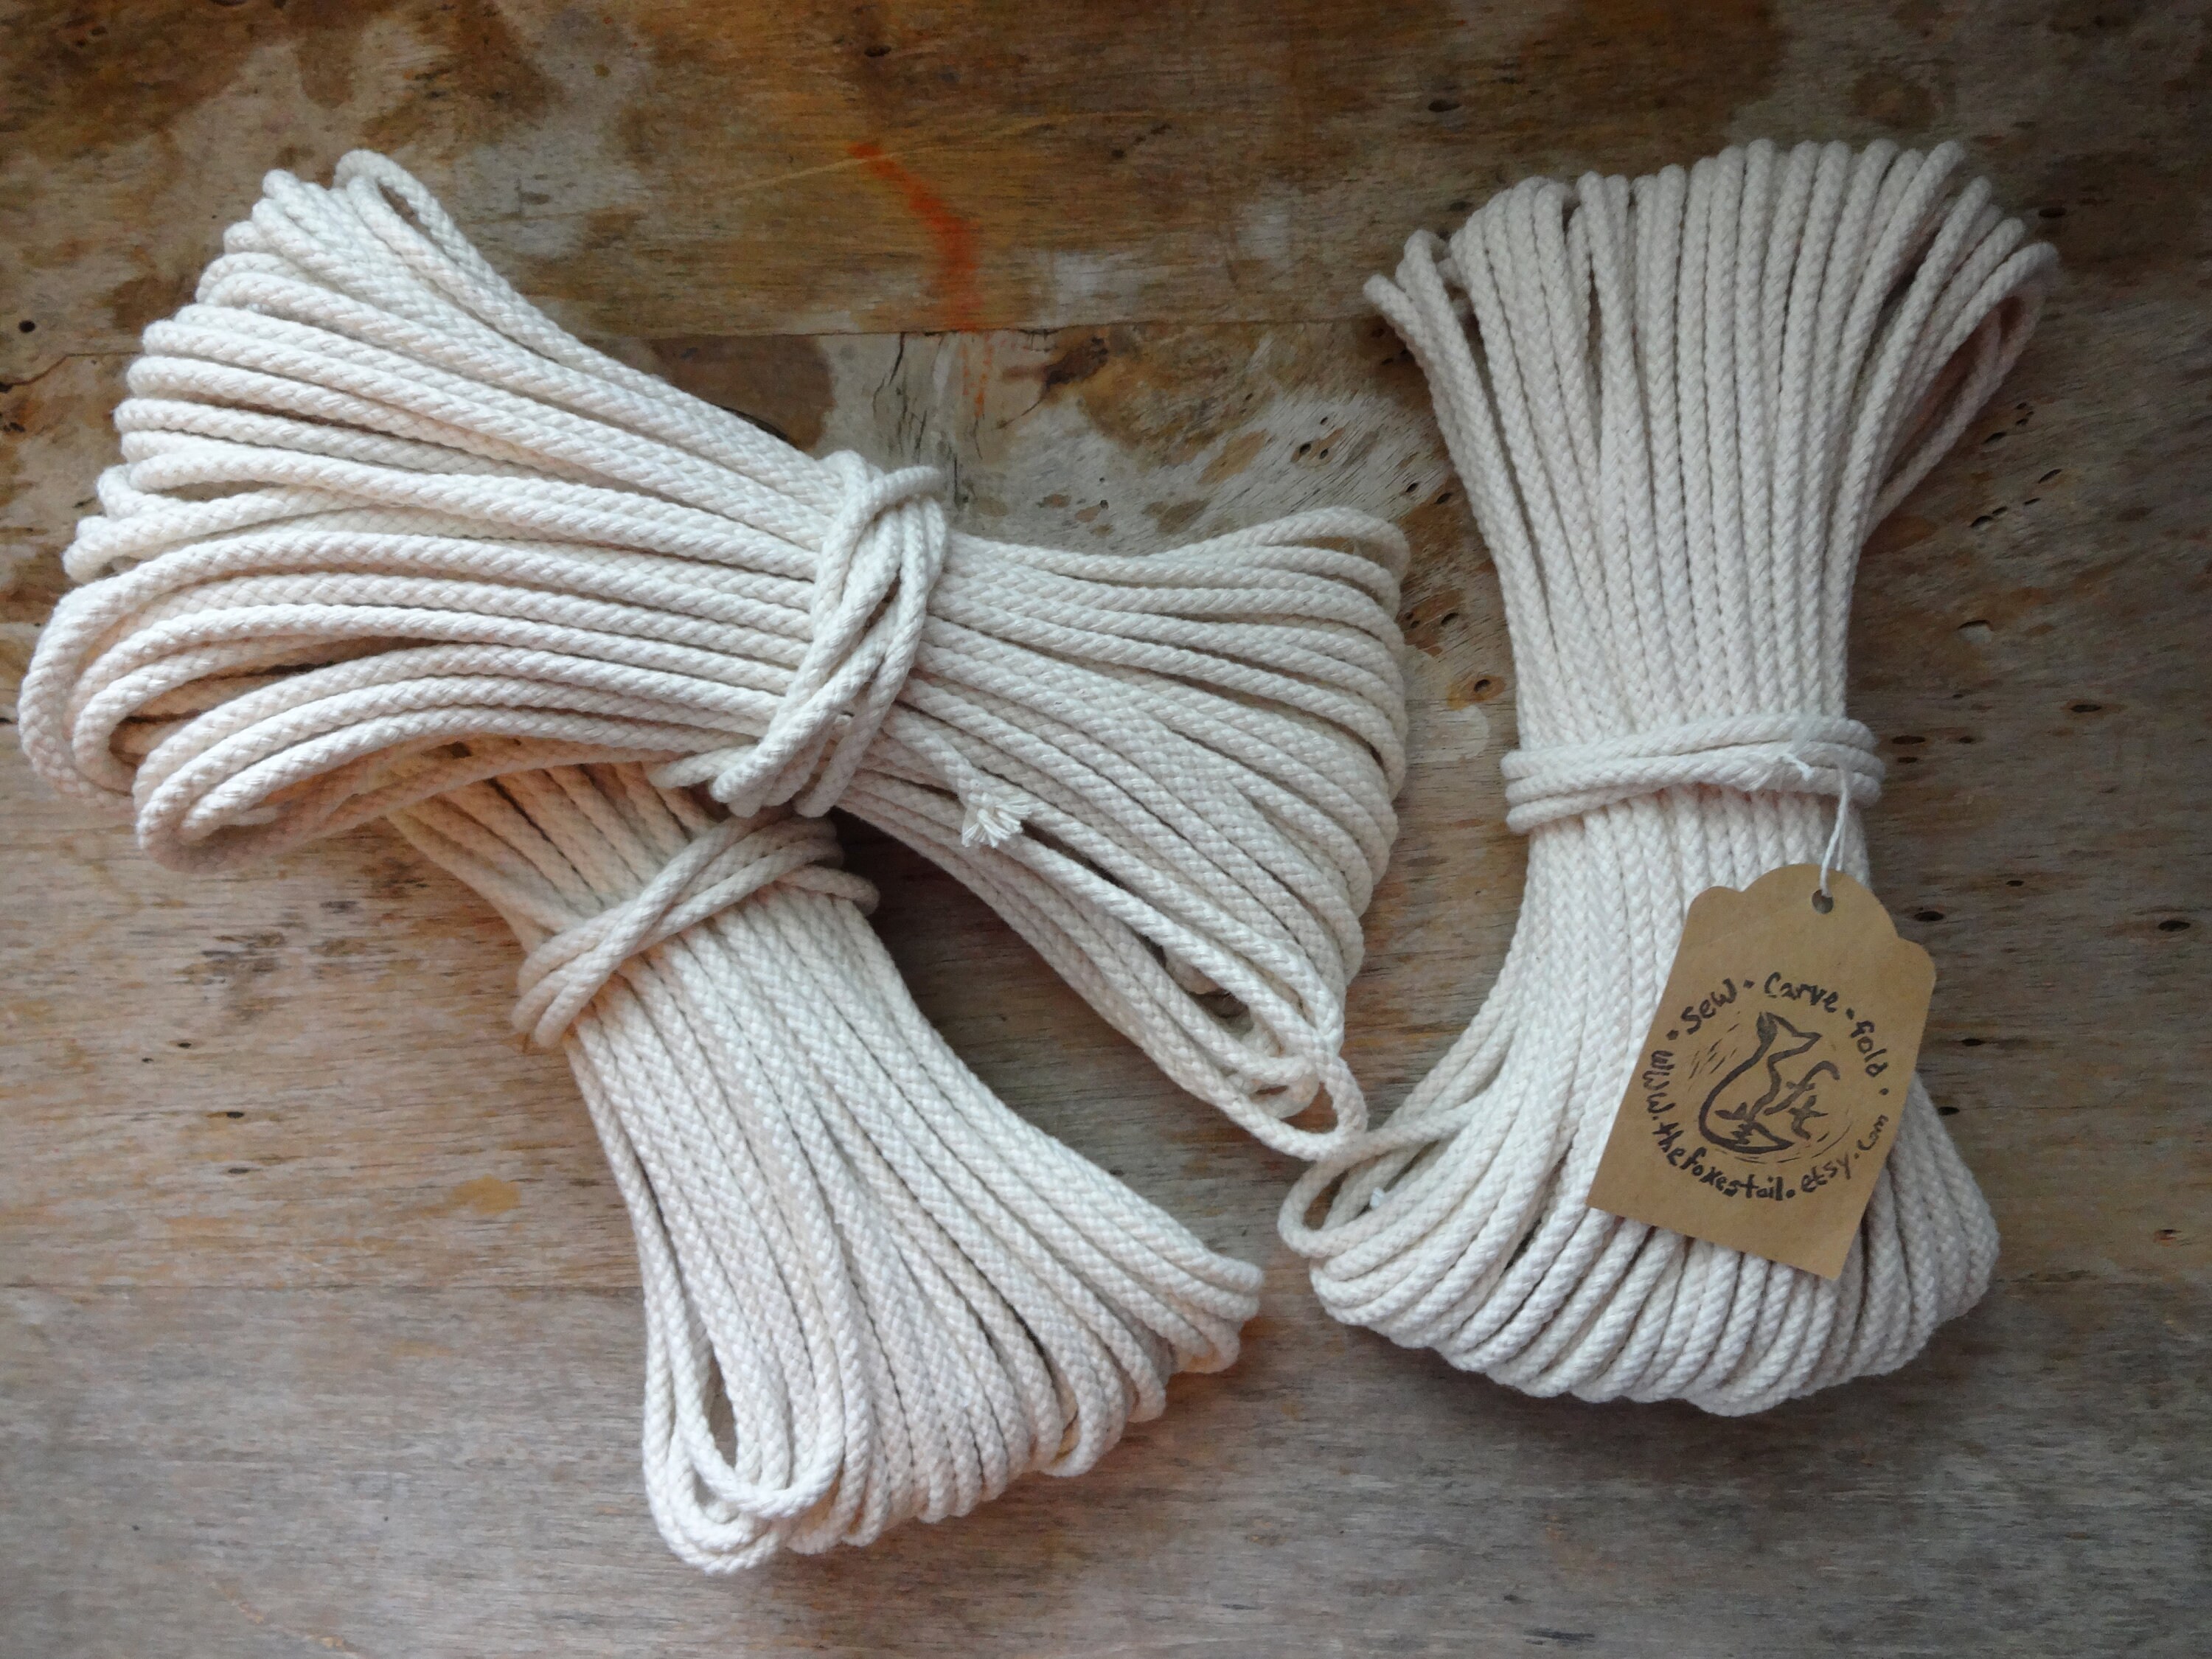 3/16 Cotton Rope By the Yard - 10 Yards - 100% Cotton Rope By The